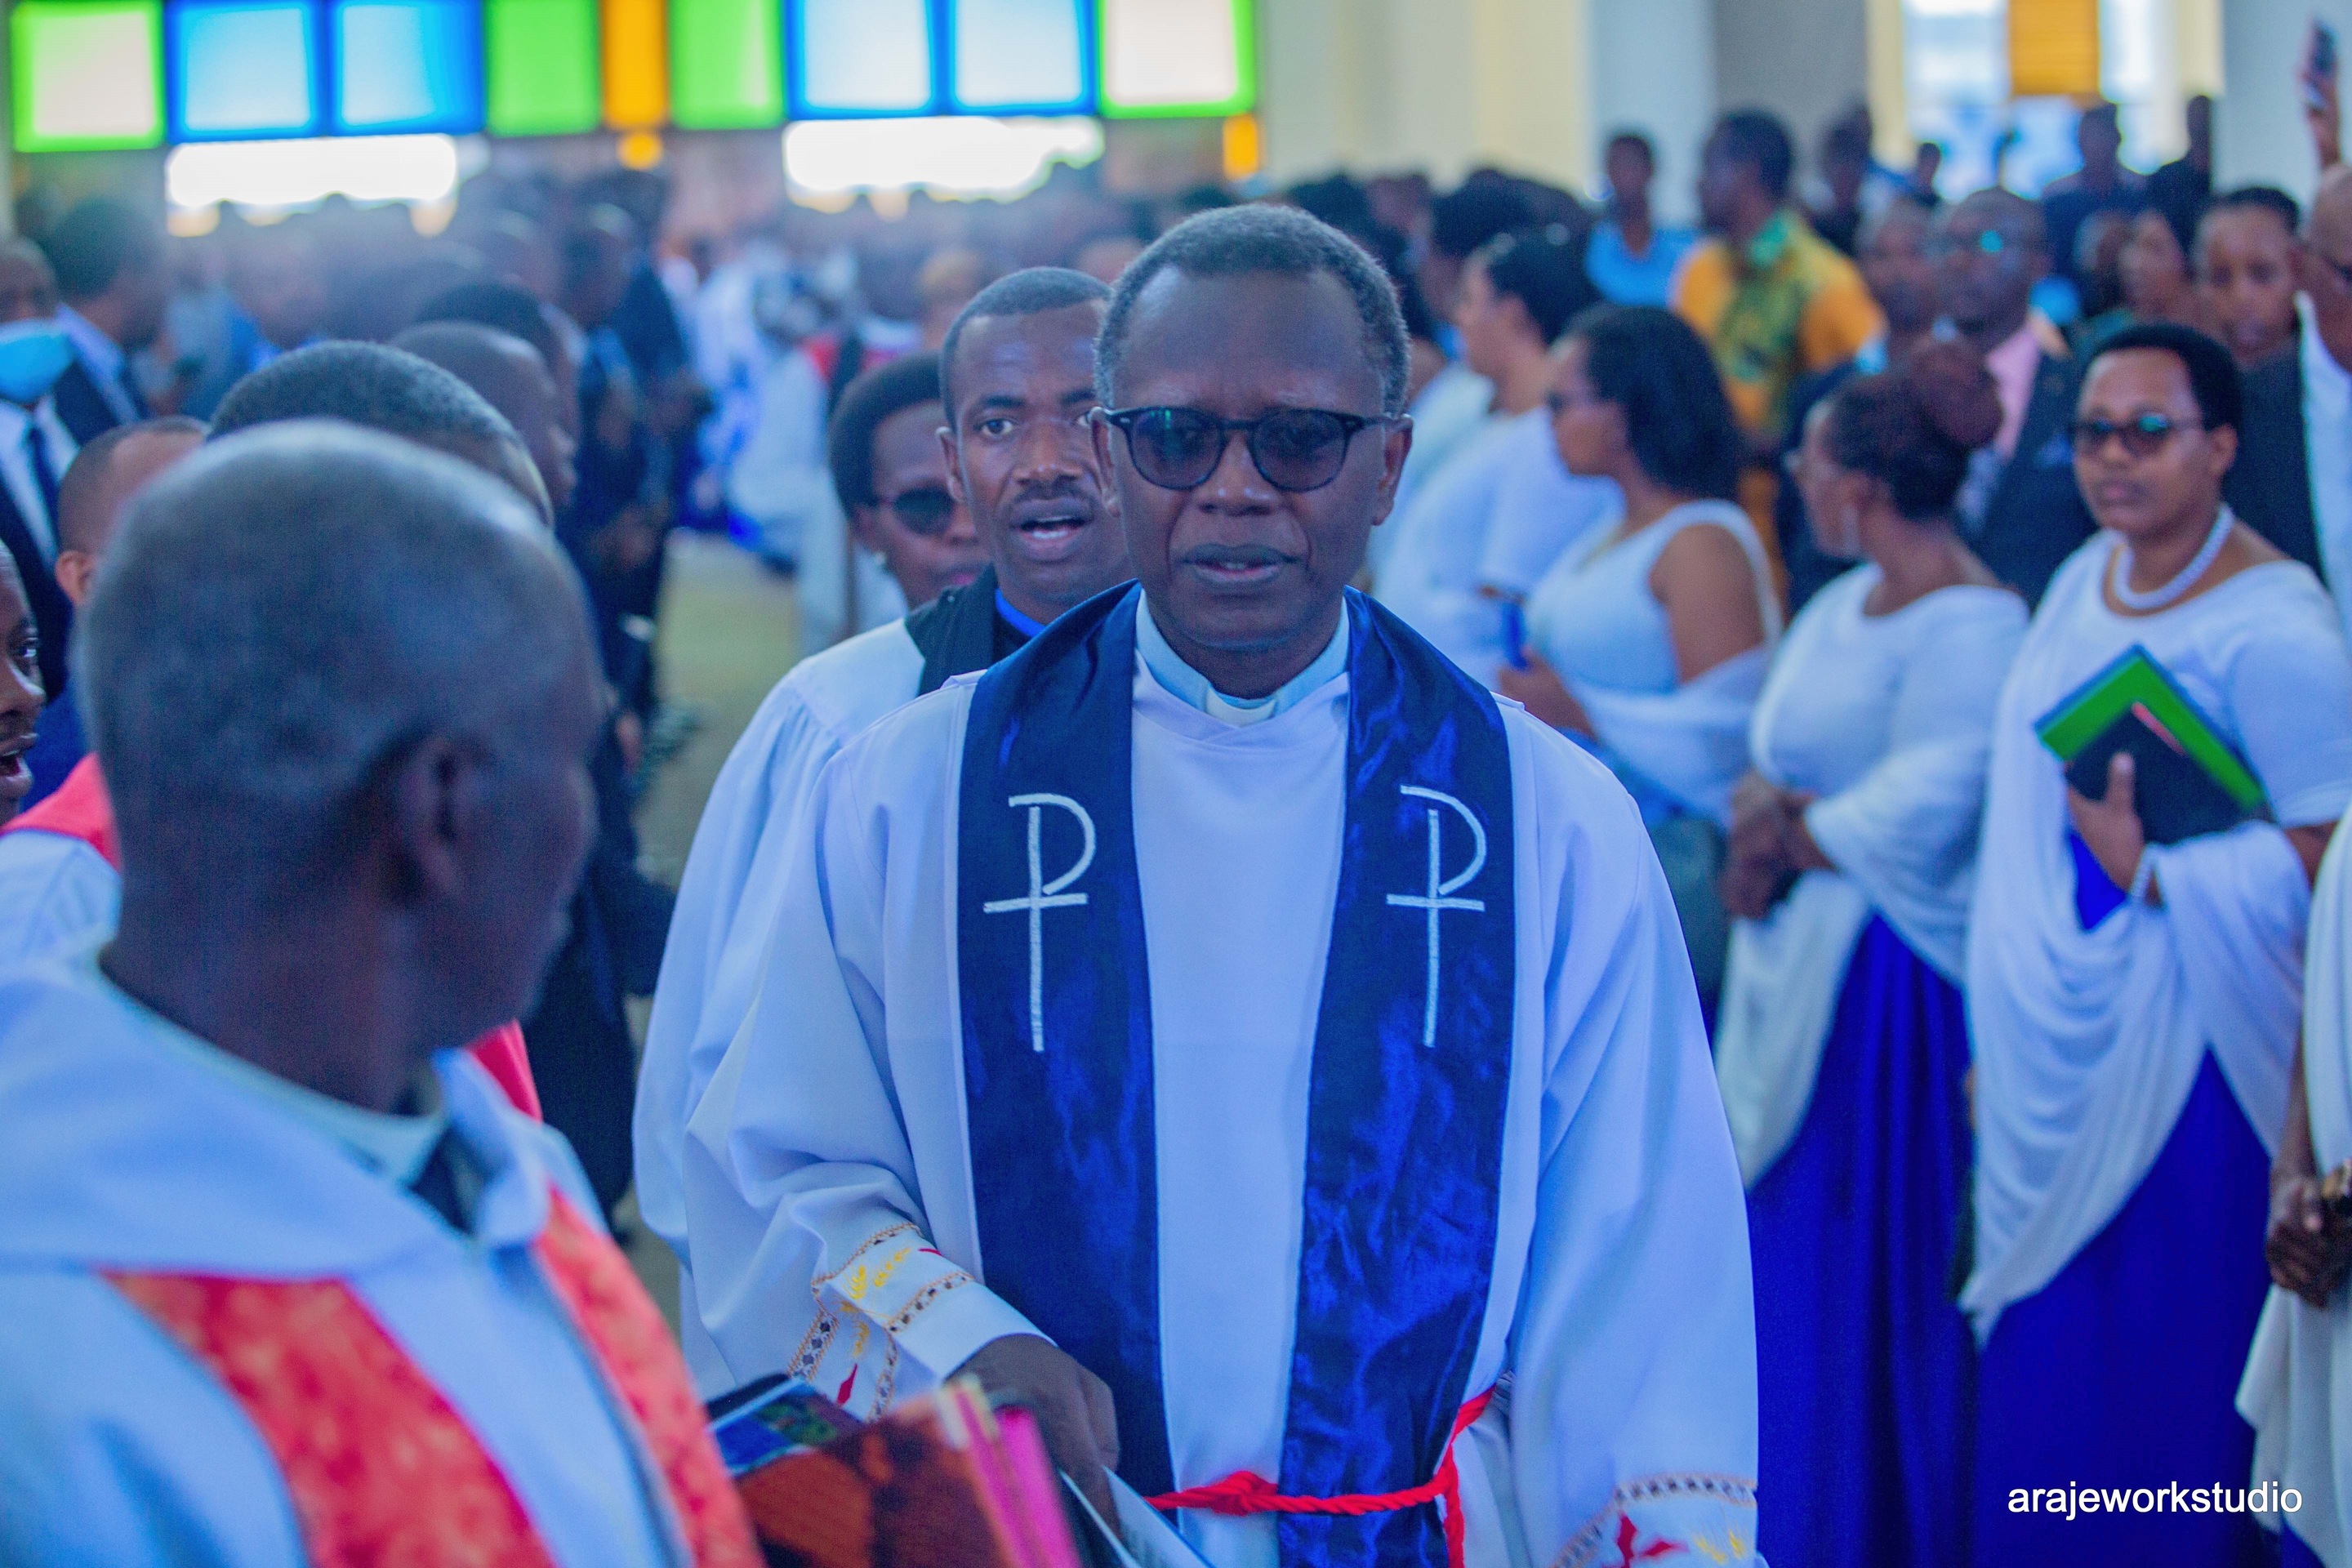 Reverend Canon Antoine Rutayisire, the Pastor of Remera Anglican Church during the event